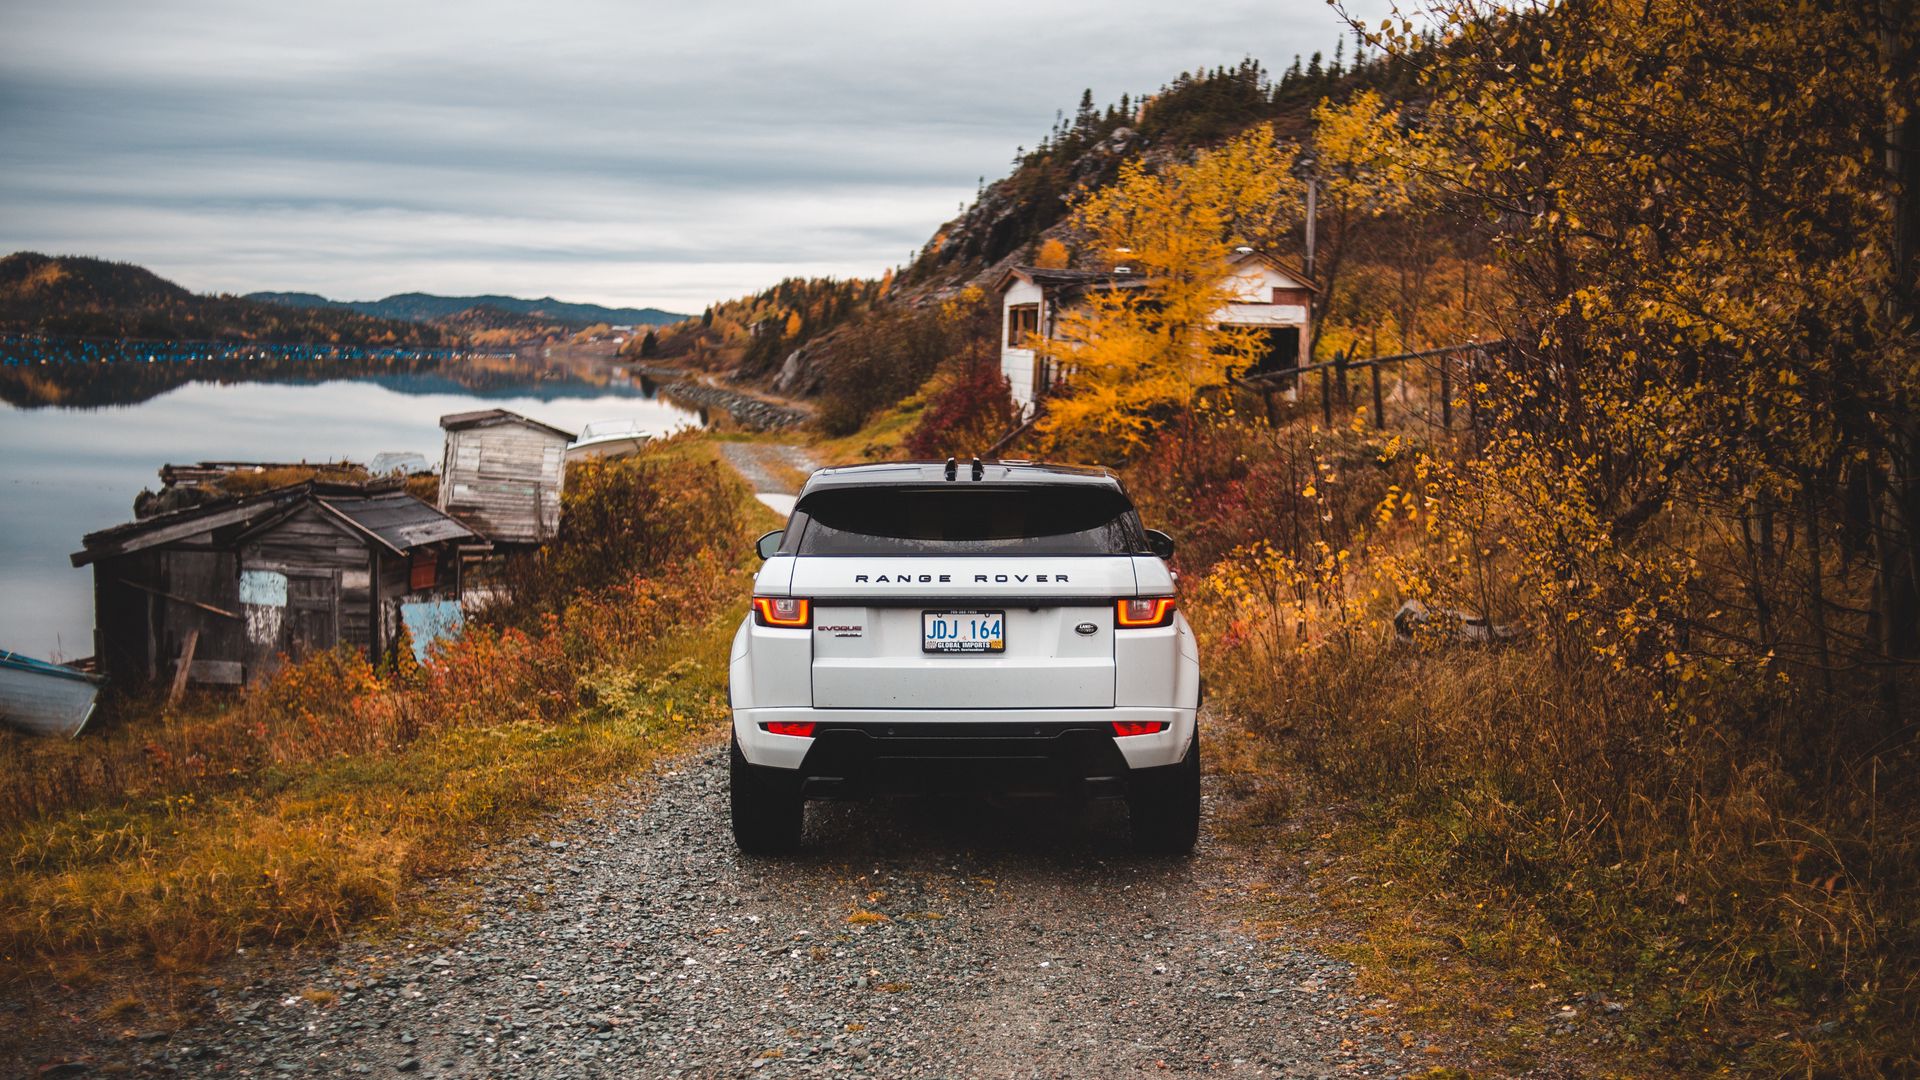 Download wallpaper 1920x1080 range rover, land rover, suv, autumn, rear  view full hd, hdtv, fhd, 1080p hd background